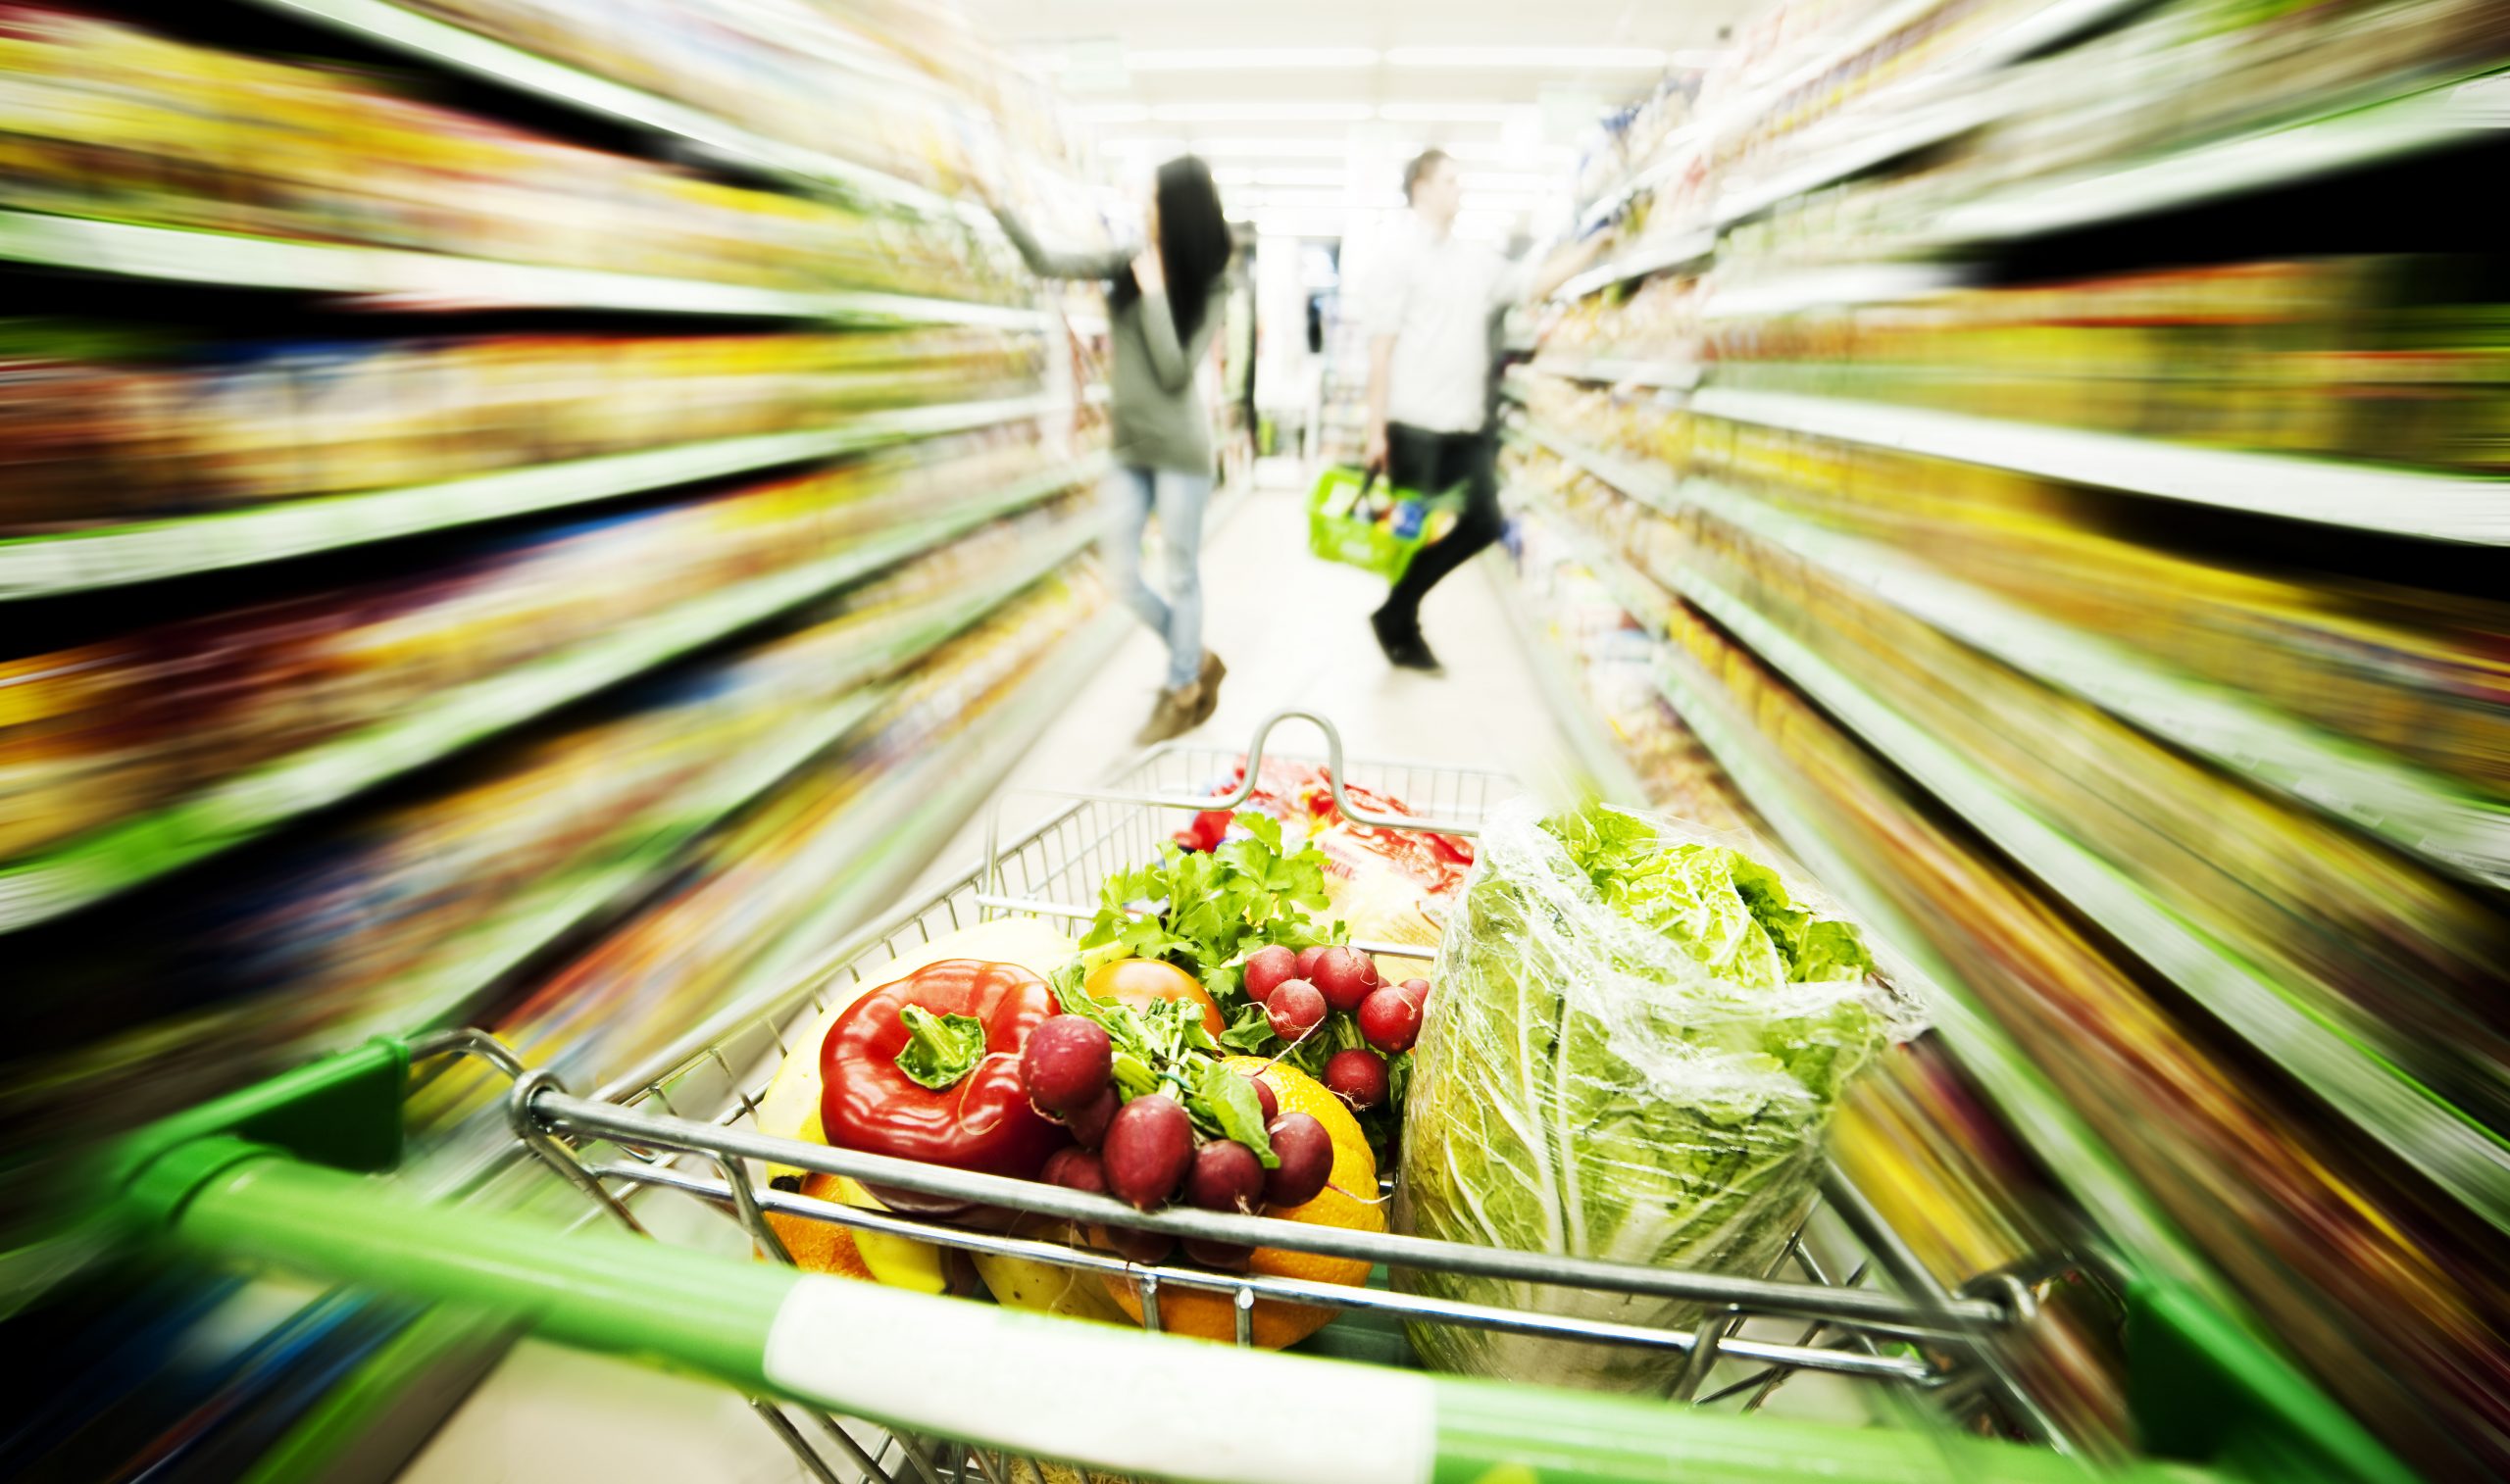 Food price increases forebode a “heavy winter” for households